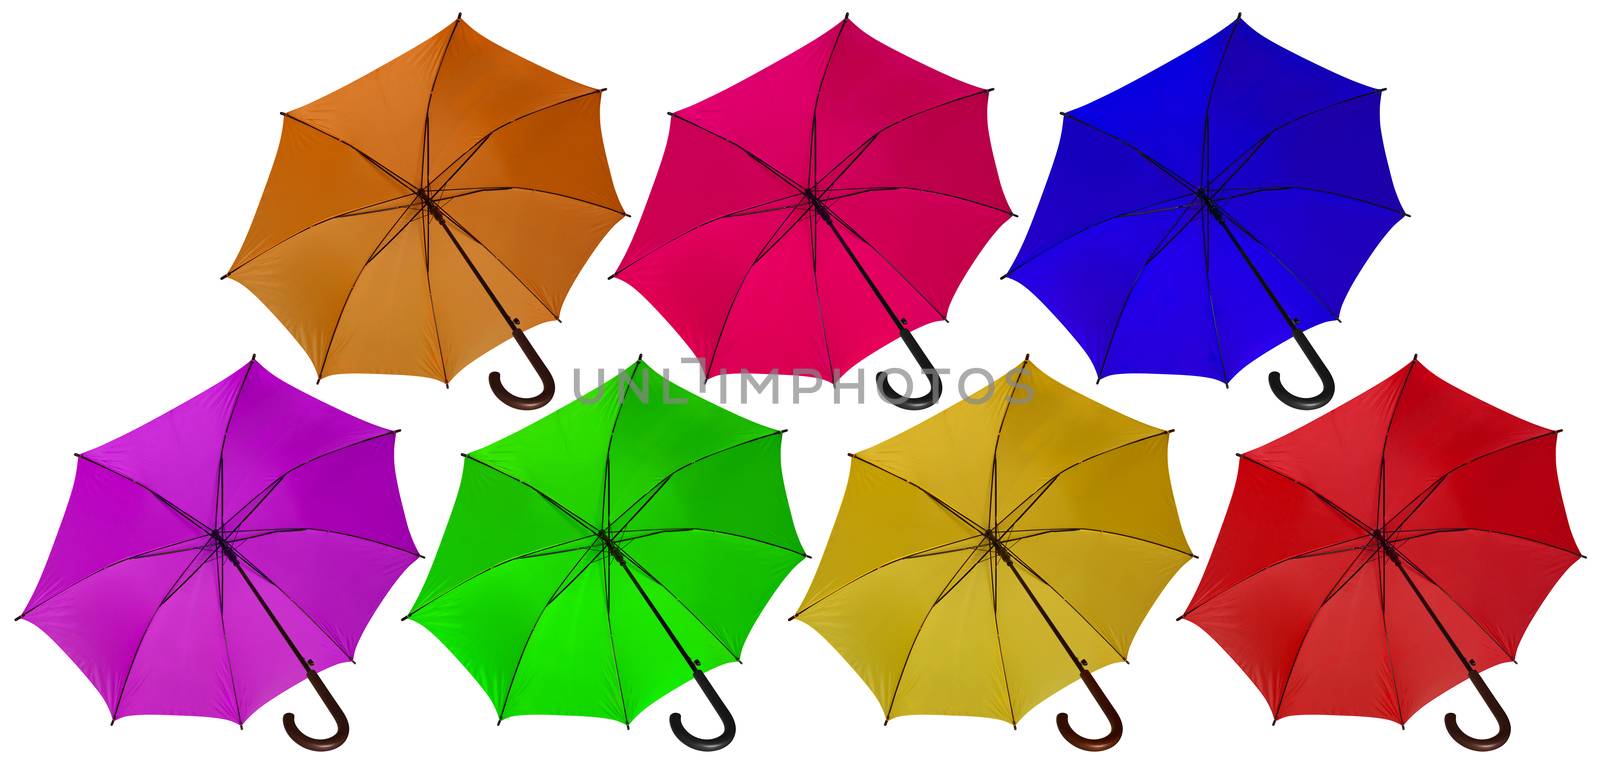 Open colorful umbrellas isolated on white background.